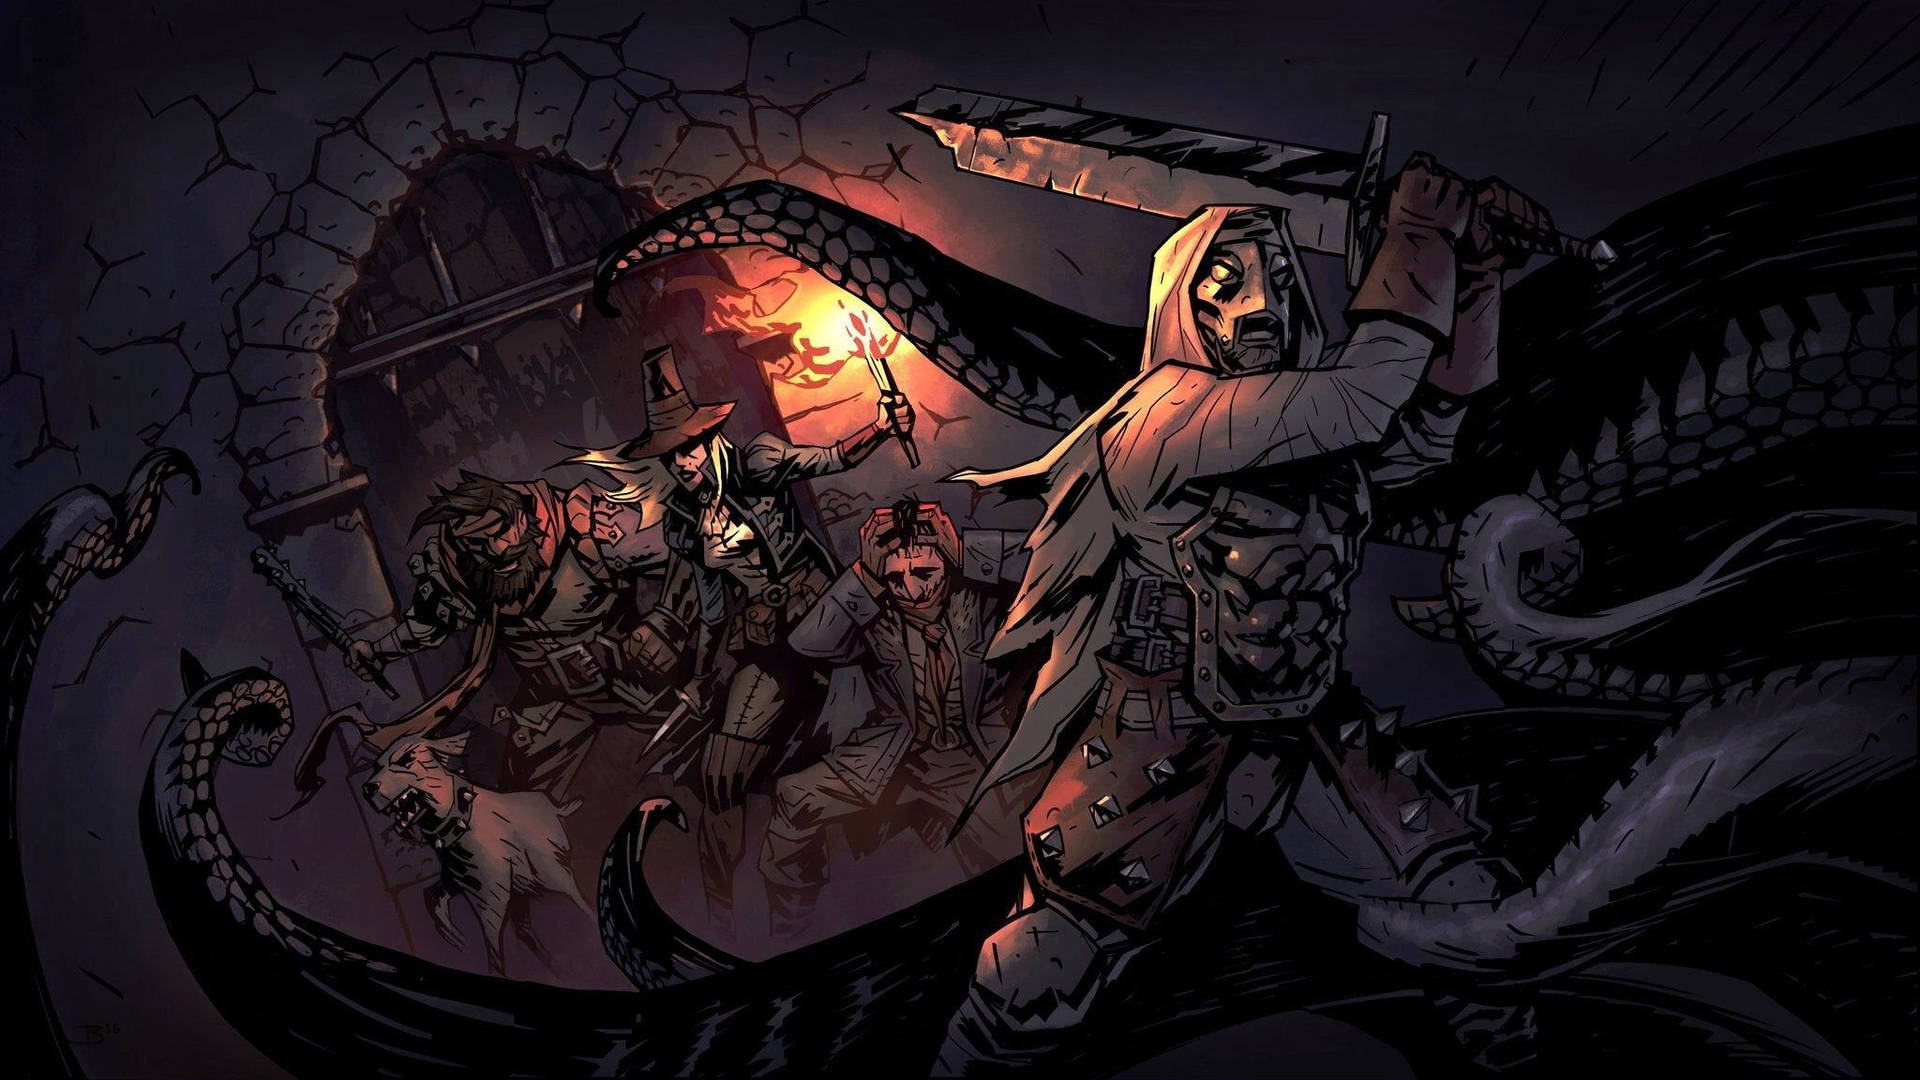 A menacing leper takes on a powerful guardian in Darkest Dungeon Wallpaper